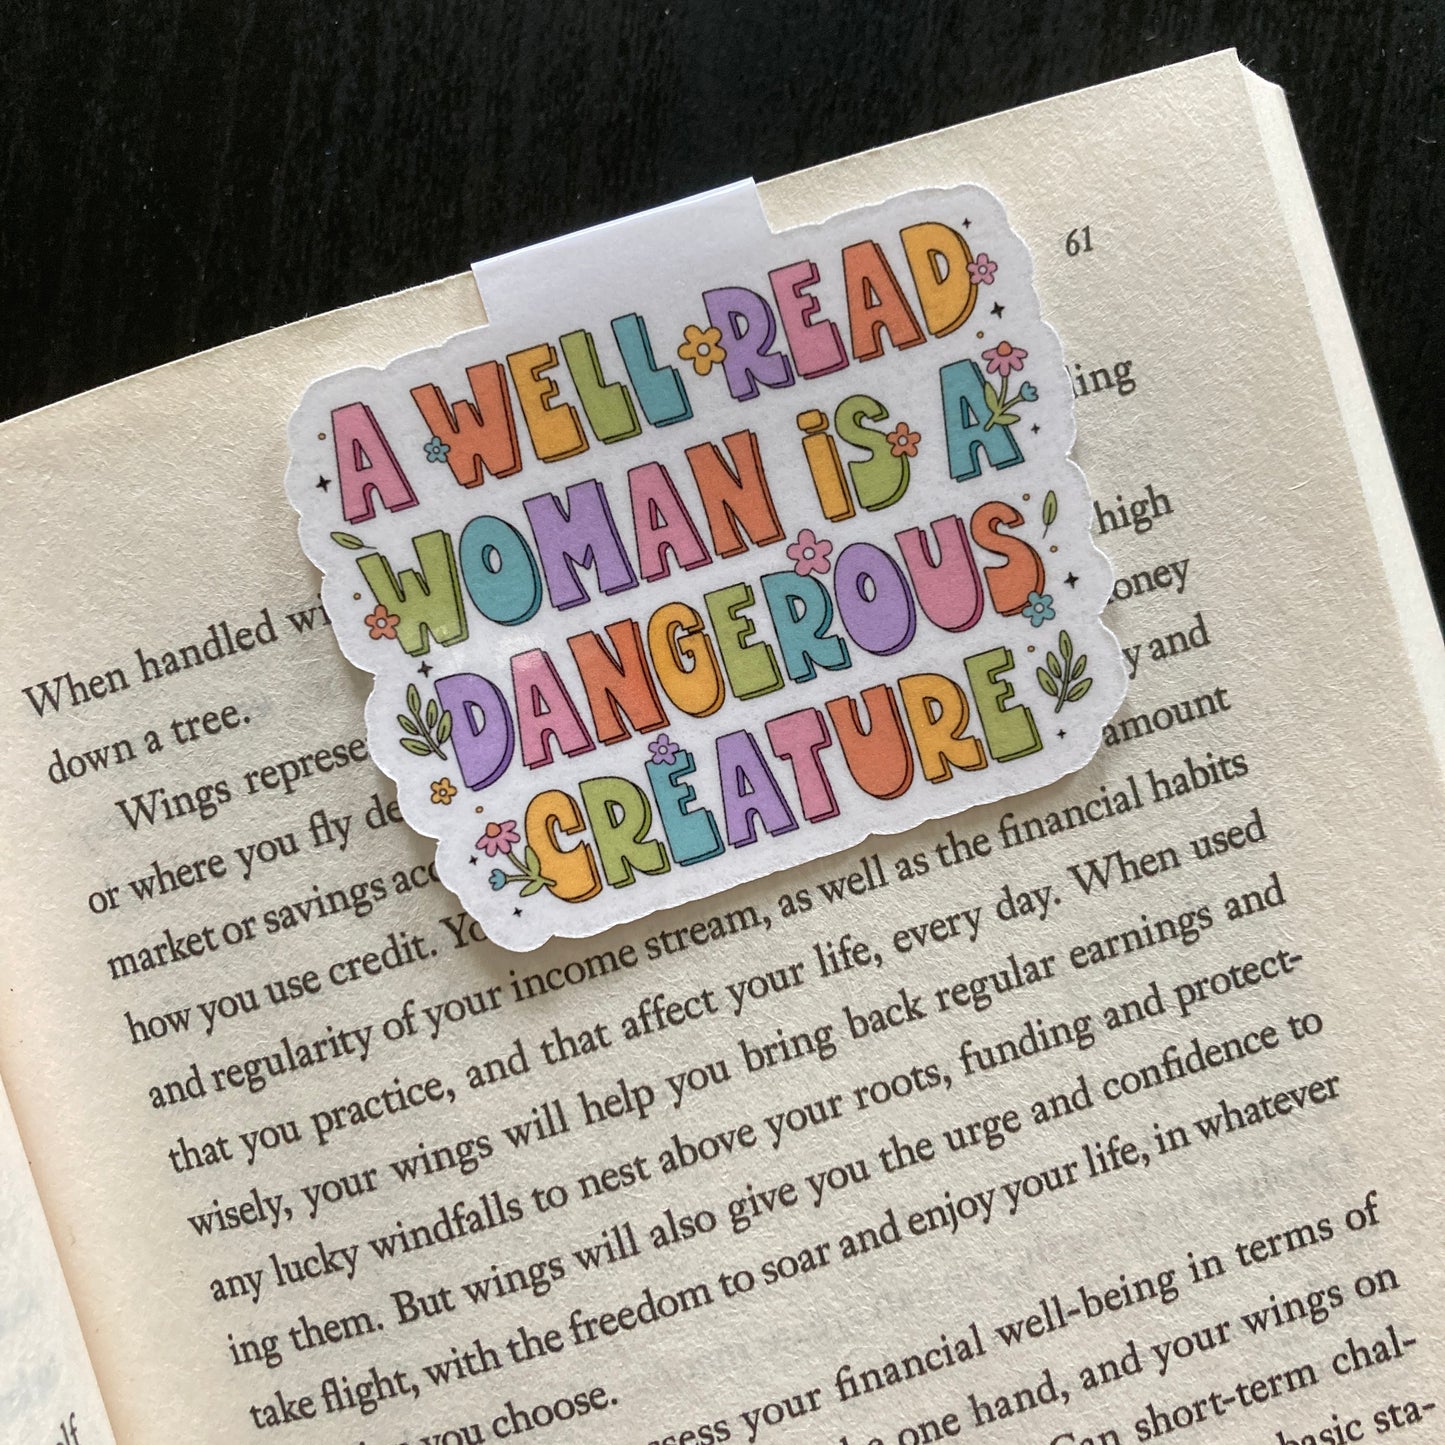 A Well Read Woman Is a Dangerous Creature Bookmark